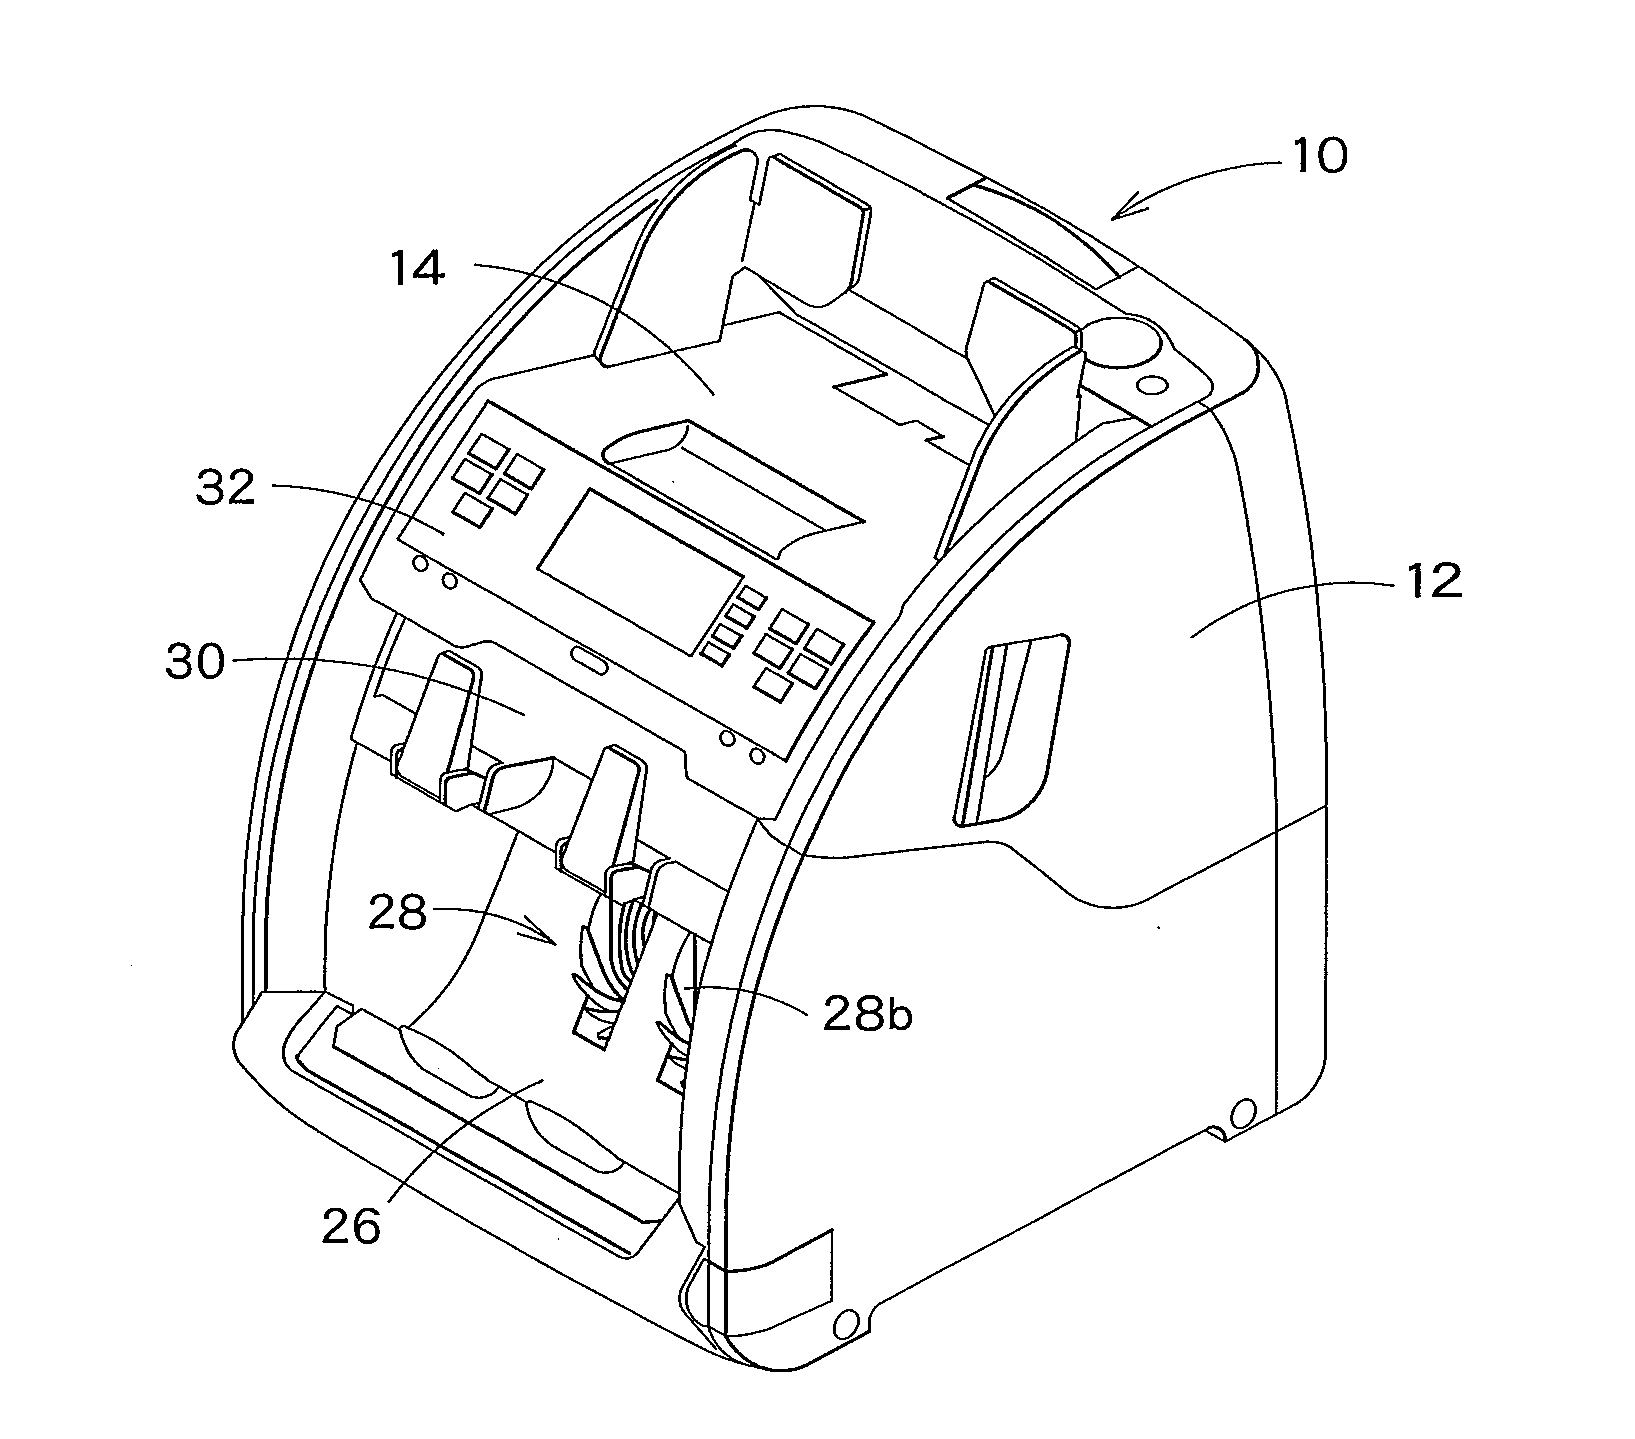 Banknote recognition and counting machine and banknote recognition and counting method